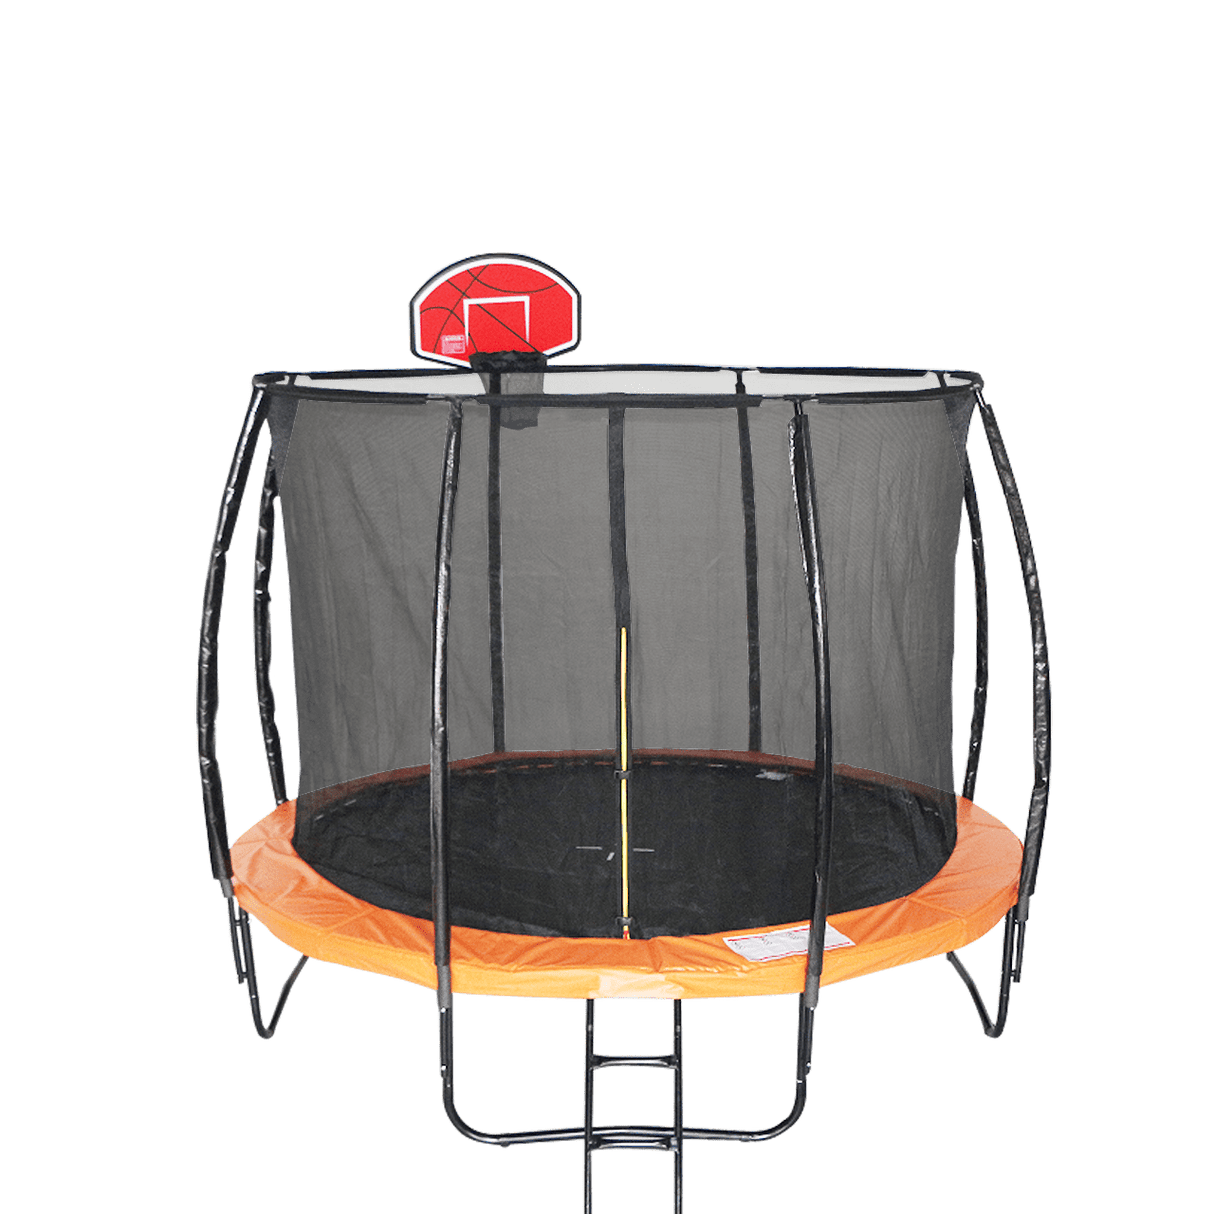 ALL 4 KIDS 8 FT Jump Zone Spring Trampoline with Basketball Board